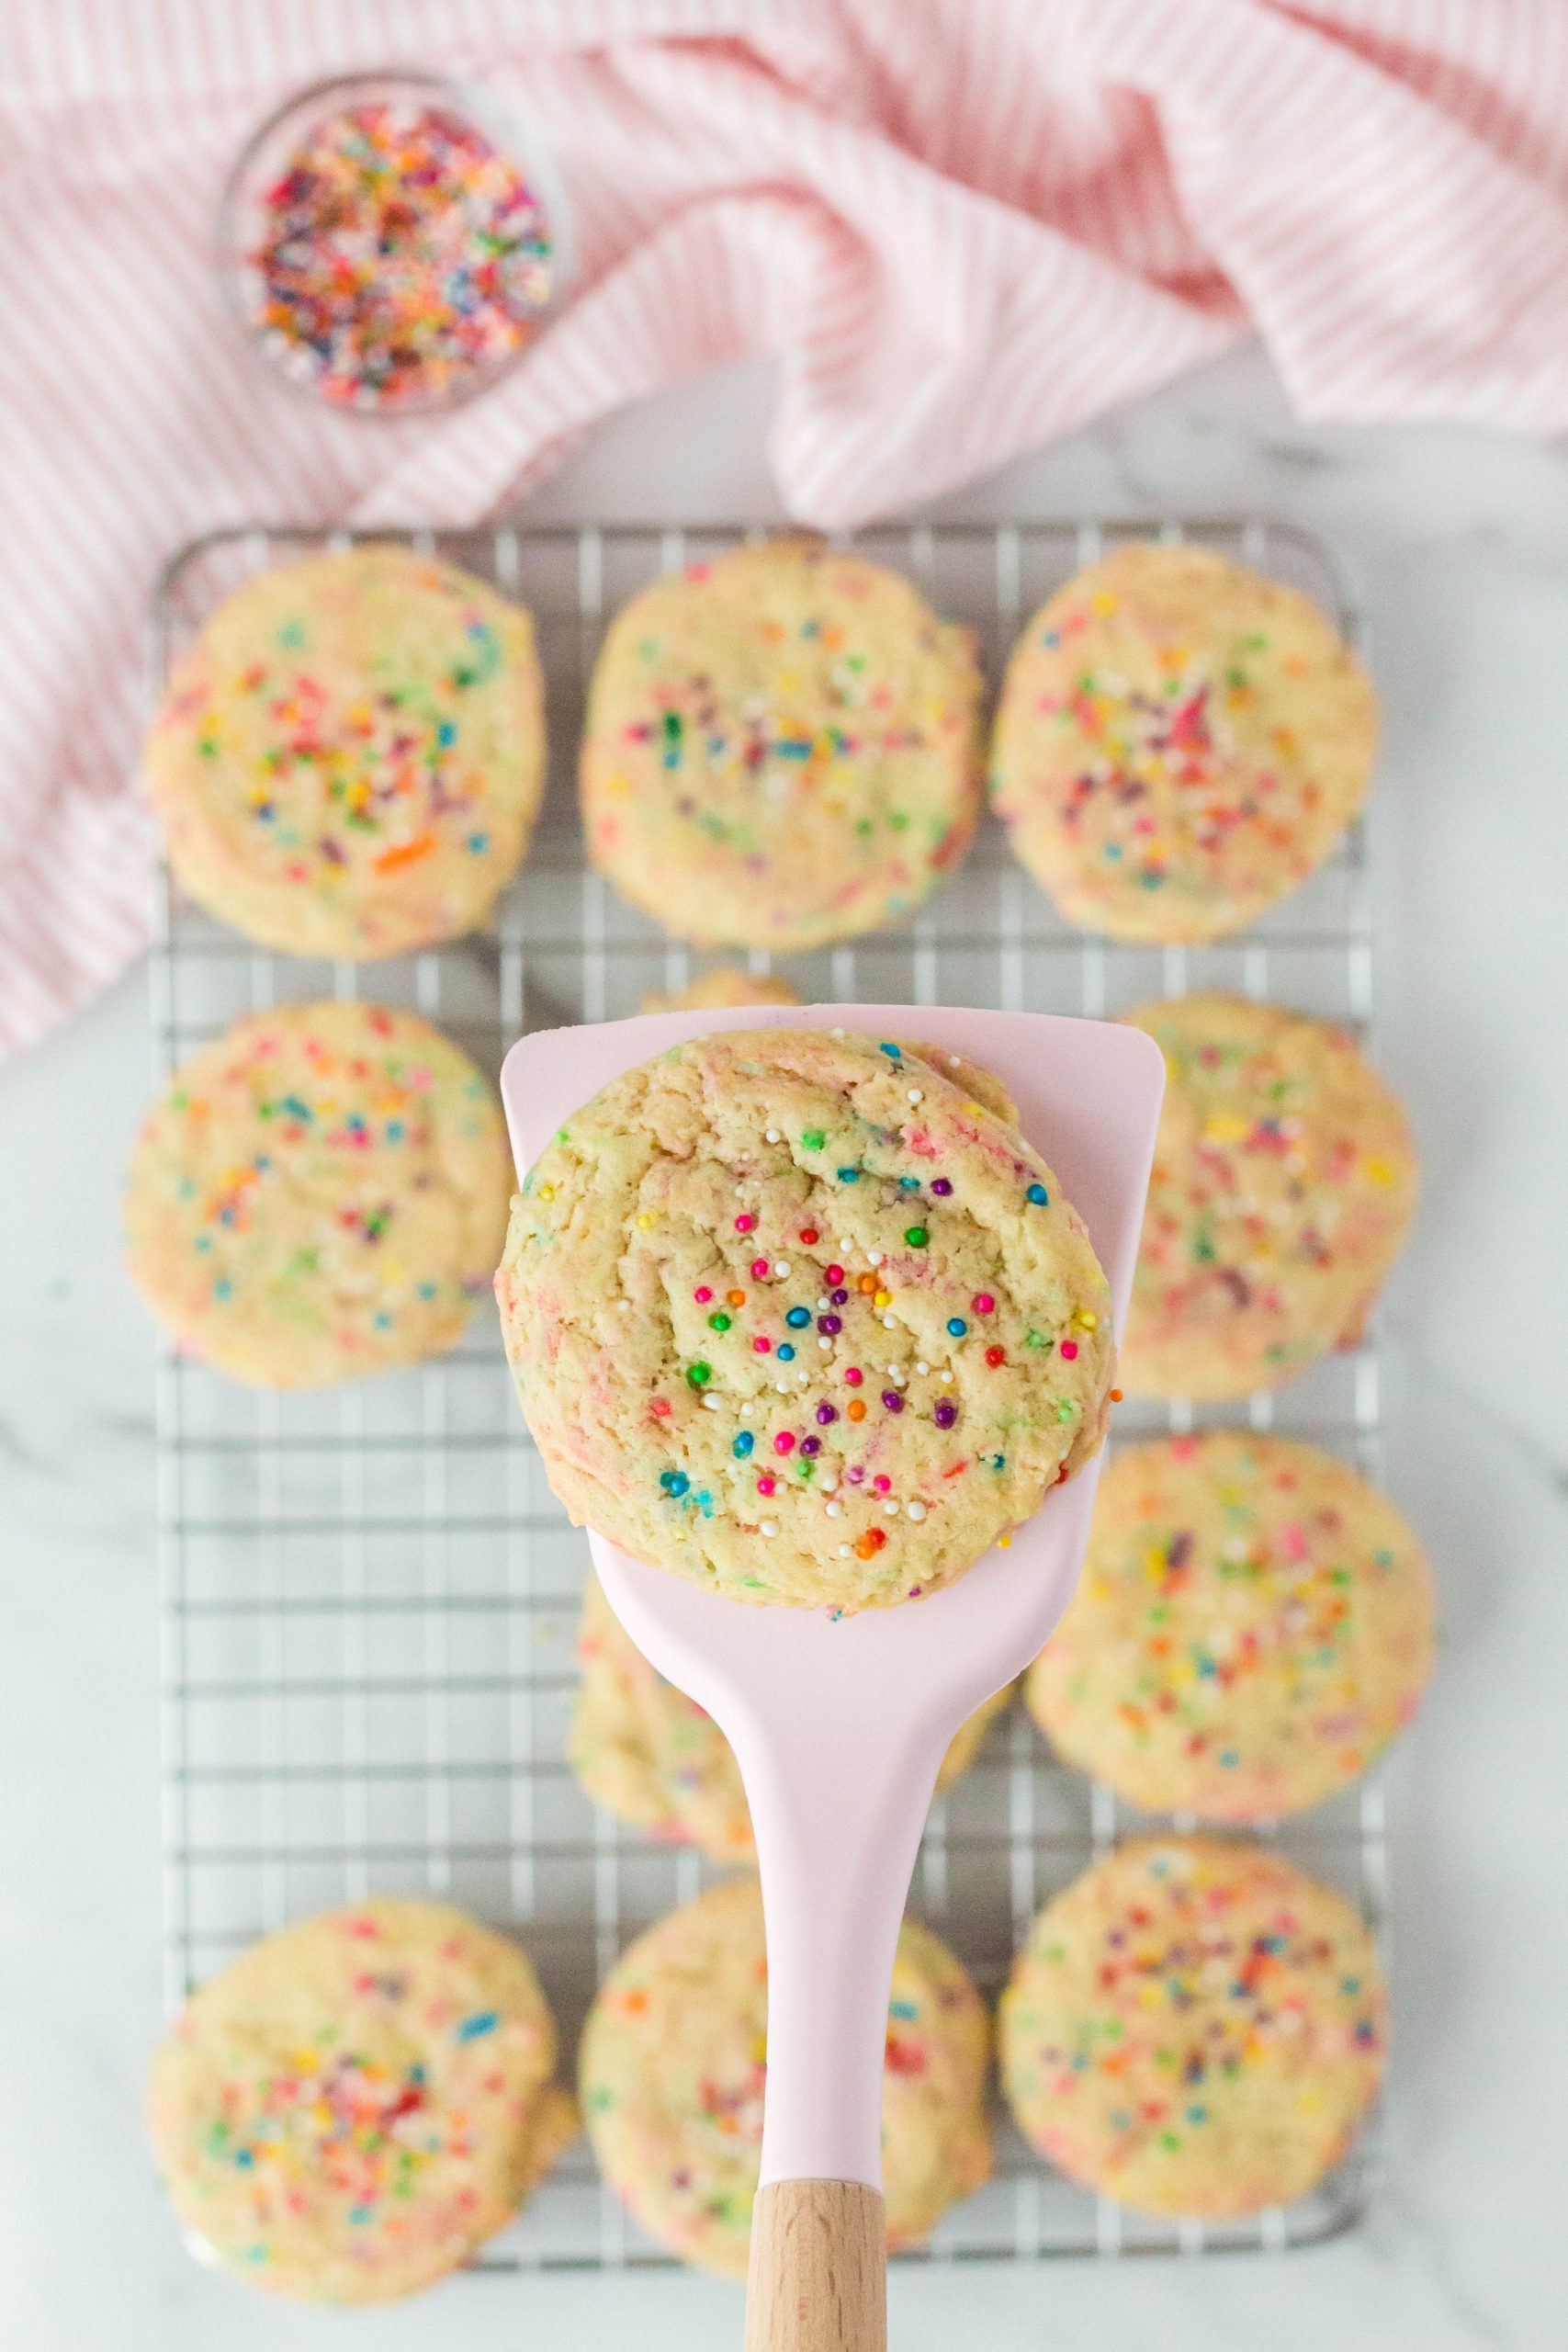 Soft, chewy, and filled with sprinkles these Vegan Funfetti Cookies will be a huge hit with all! They're made in one bowl and ready to enjoy in less than 20 minutes!